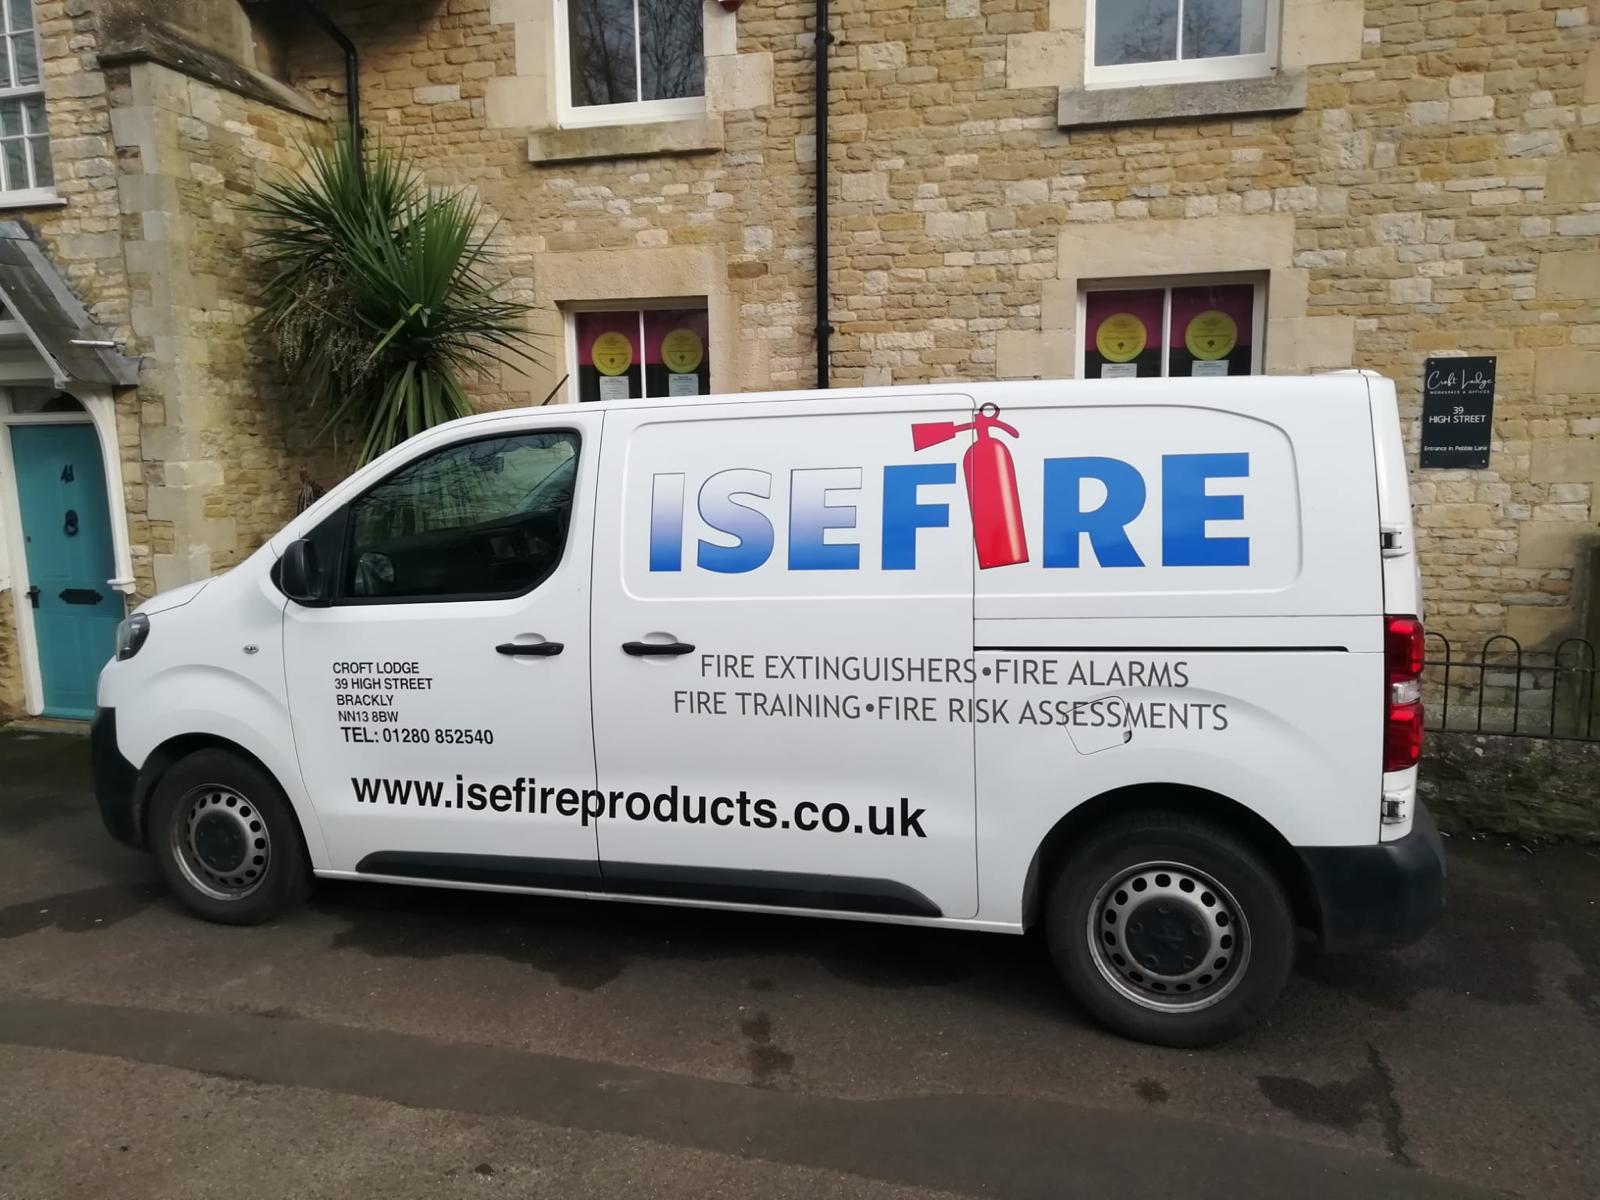 ISE Fire van parked by Brackley office entrance